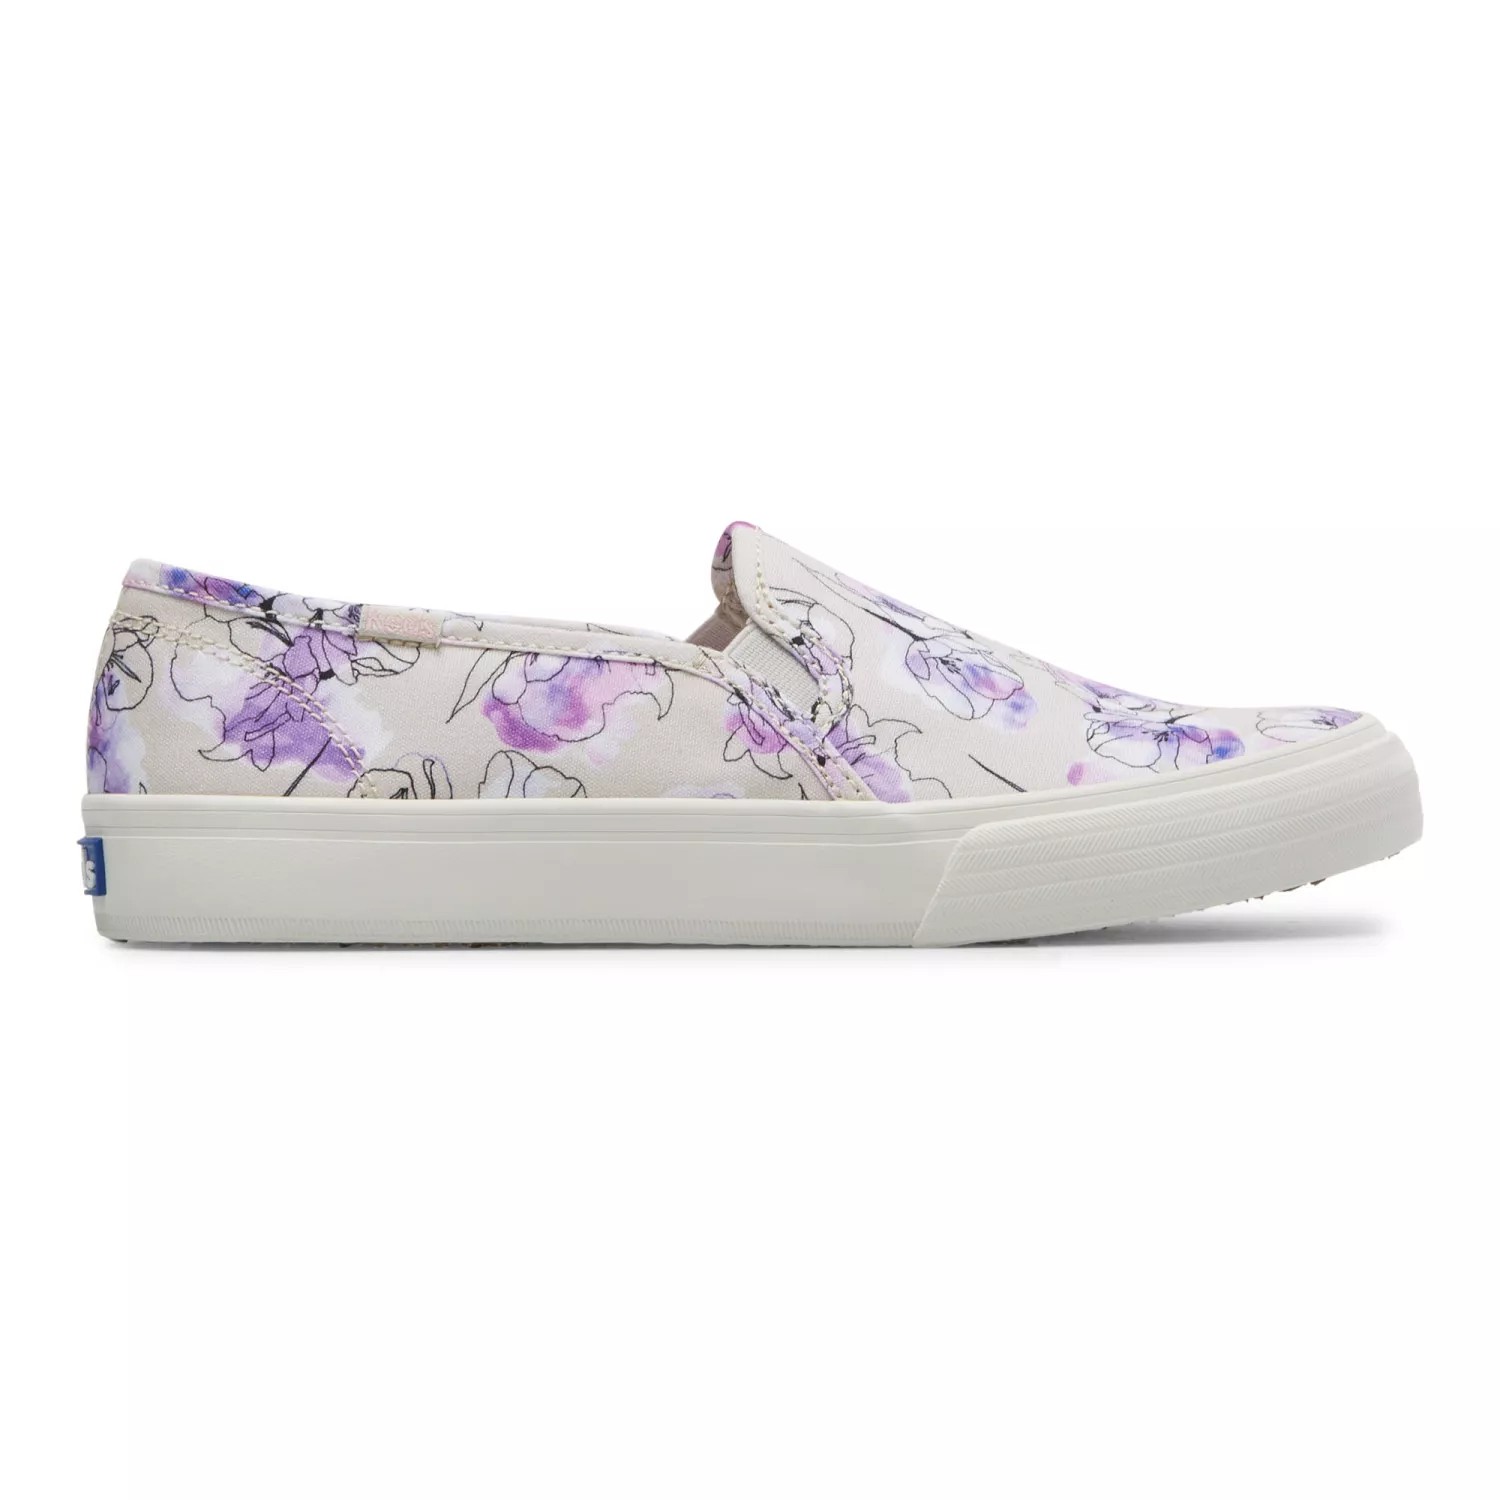 Keds Double Decker Canvas Watercolor Floral Print Slip On - Free ...